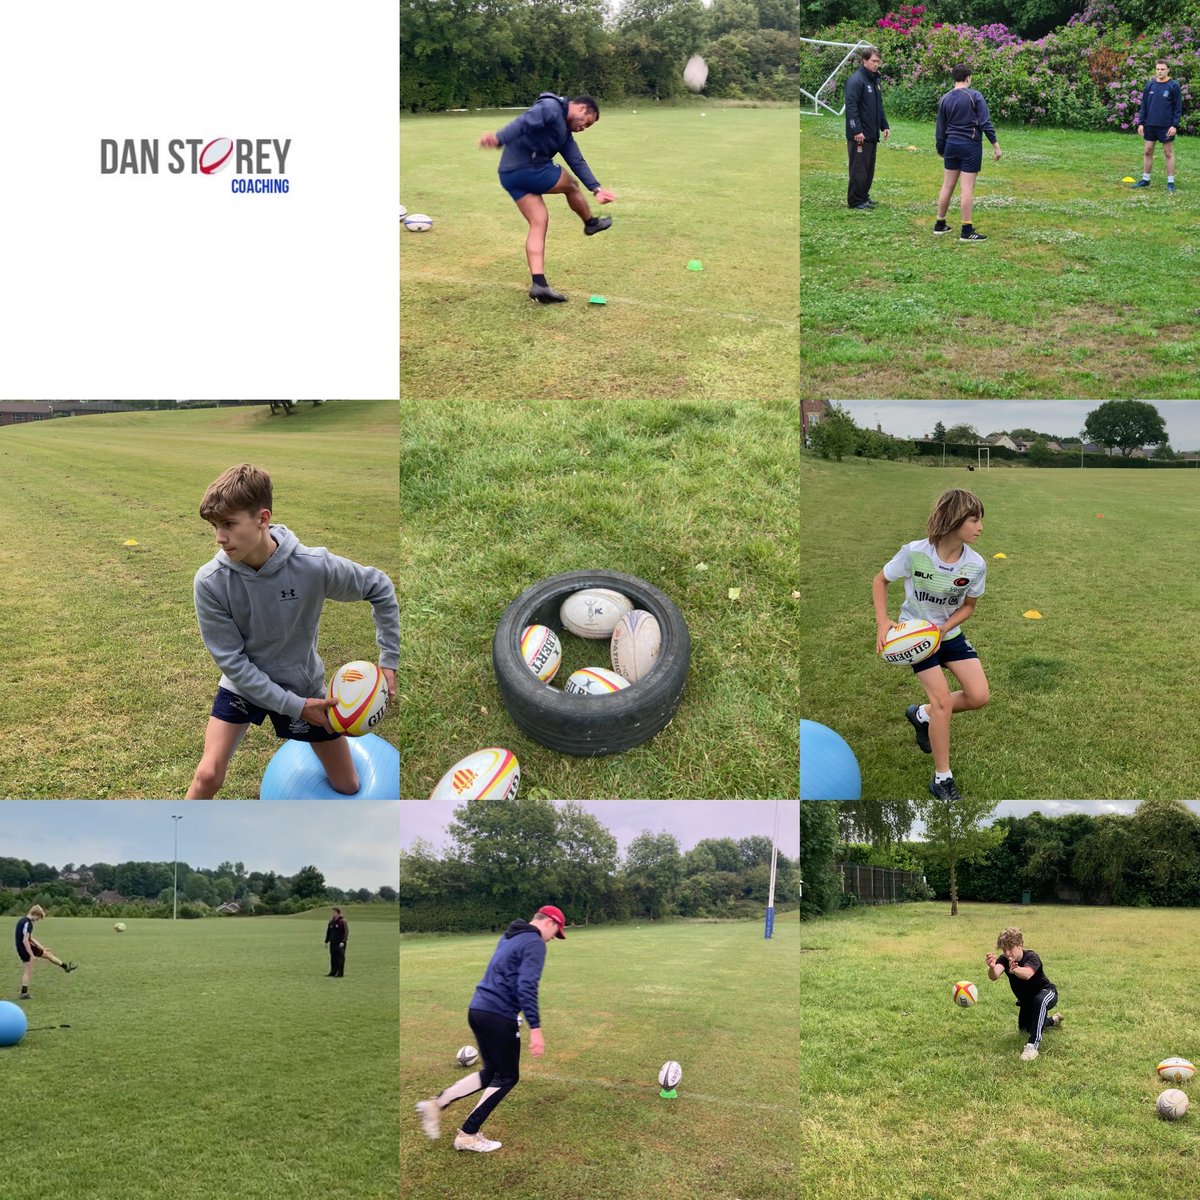 A great first week! Nine very hungry lads wanting to improve their skills! Looking to more next week! 
#Rugbyskills #Rugby #Englandrugby #Yorkshireis #Sheffieldissuper #Doncasterisgreat #Rotherhamiswonderful #Sheffieldrugbyclub #Doncasterknights #Chesterfieldrugby